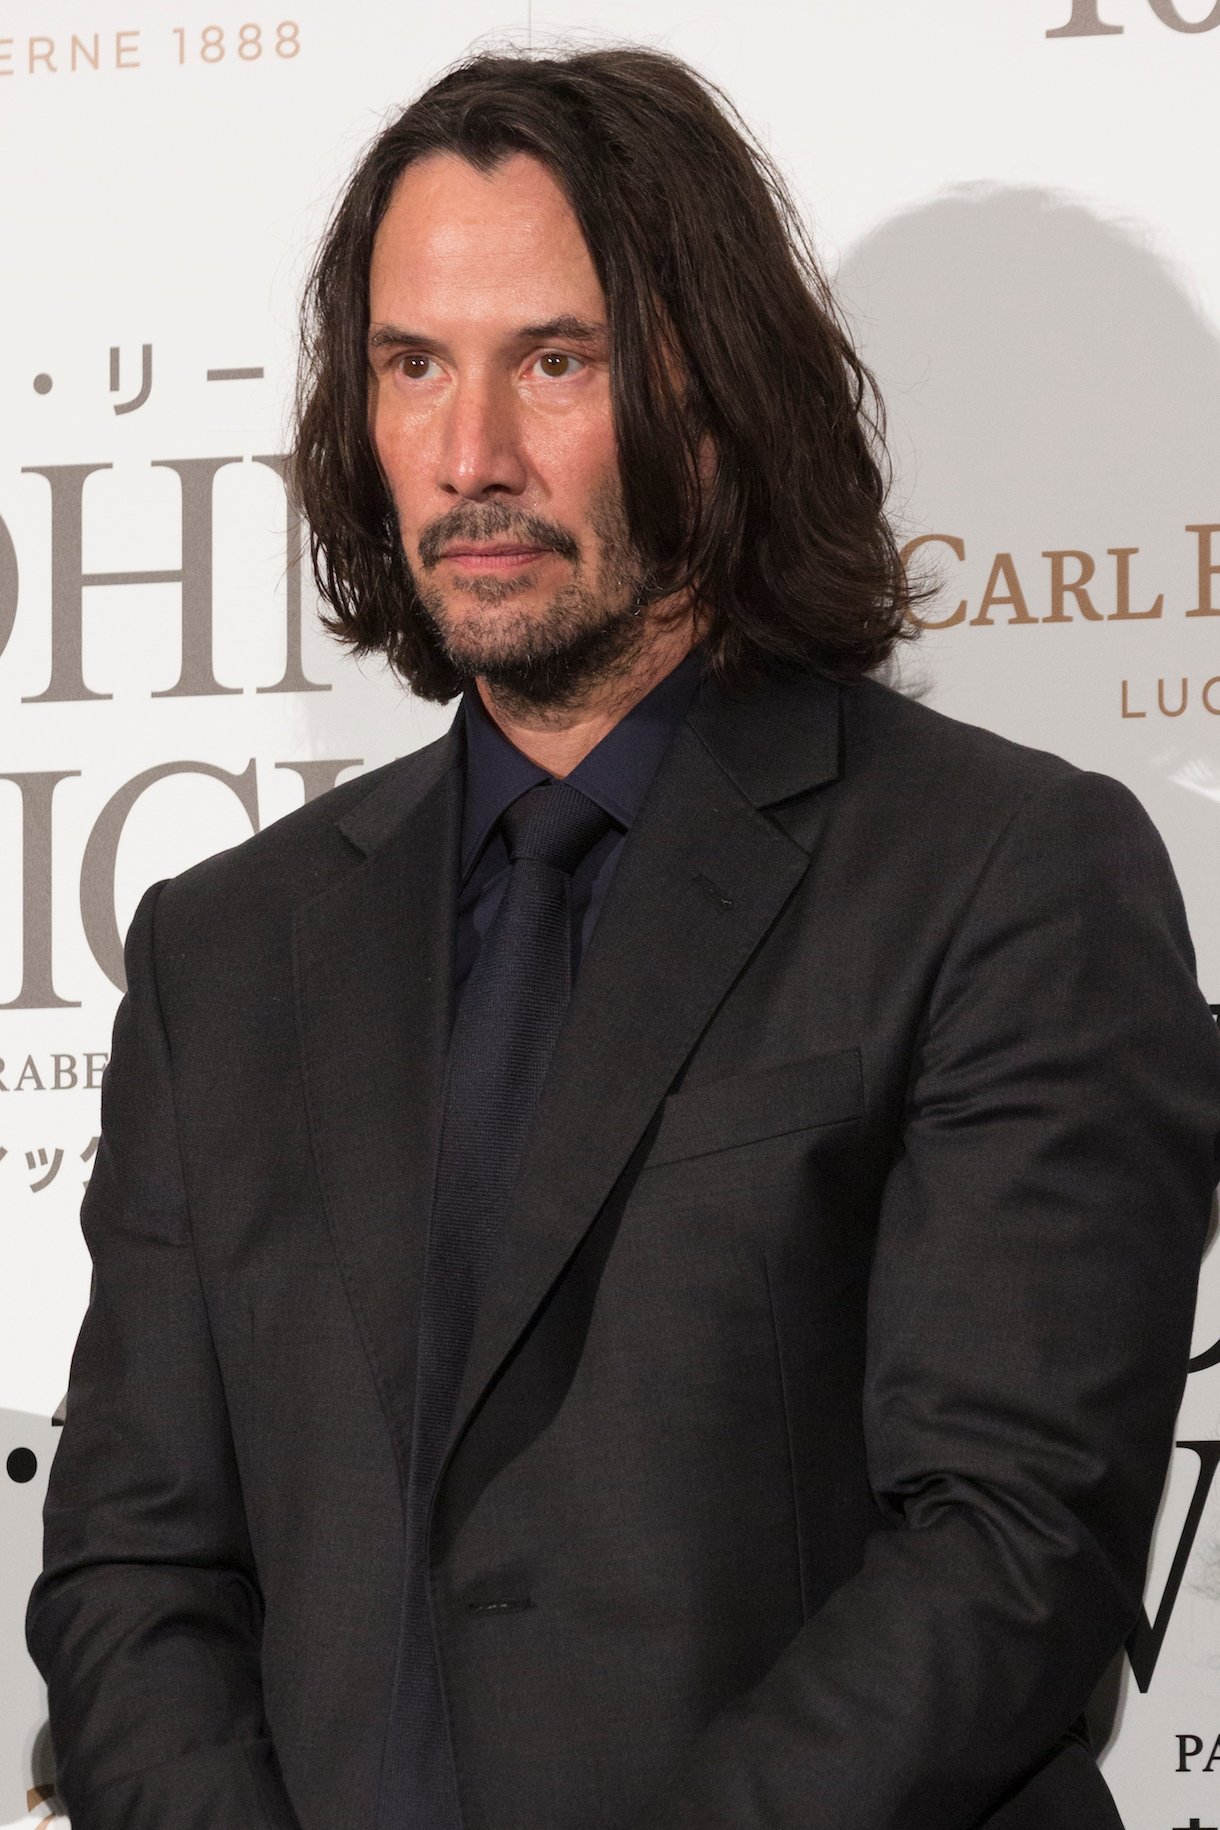 Keanu Reeves attends the Japan premiere of 'John Wick: Chapter 3